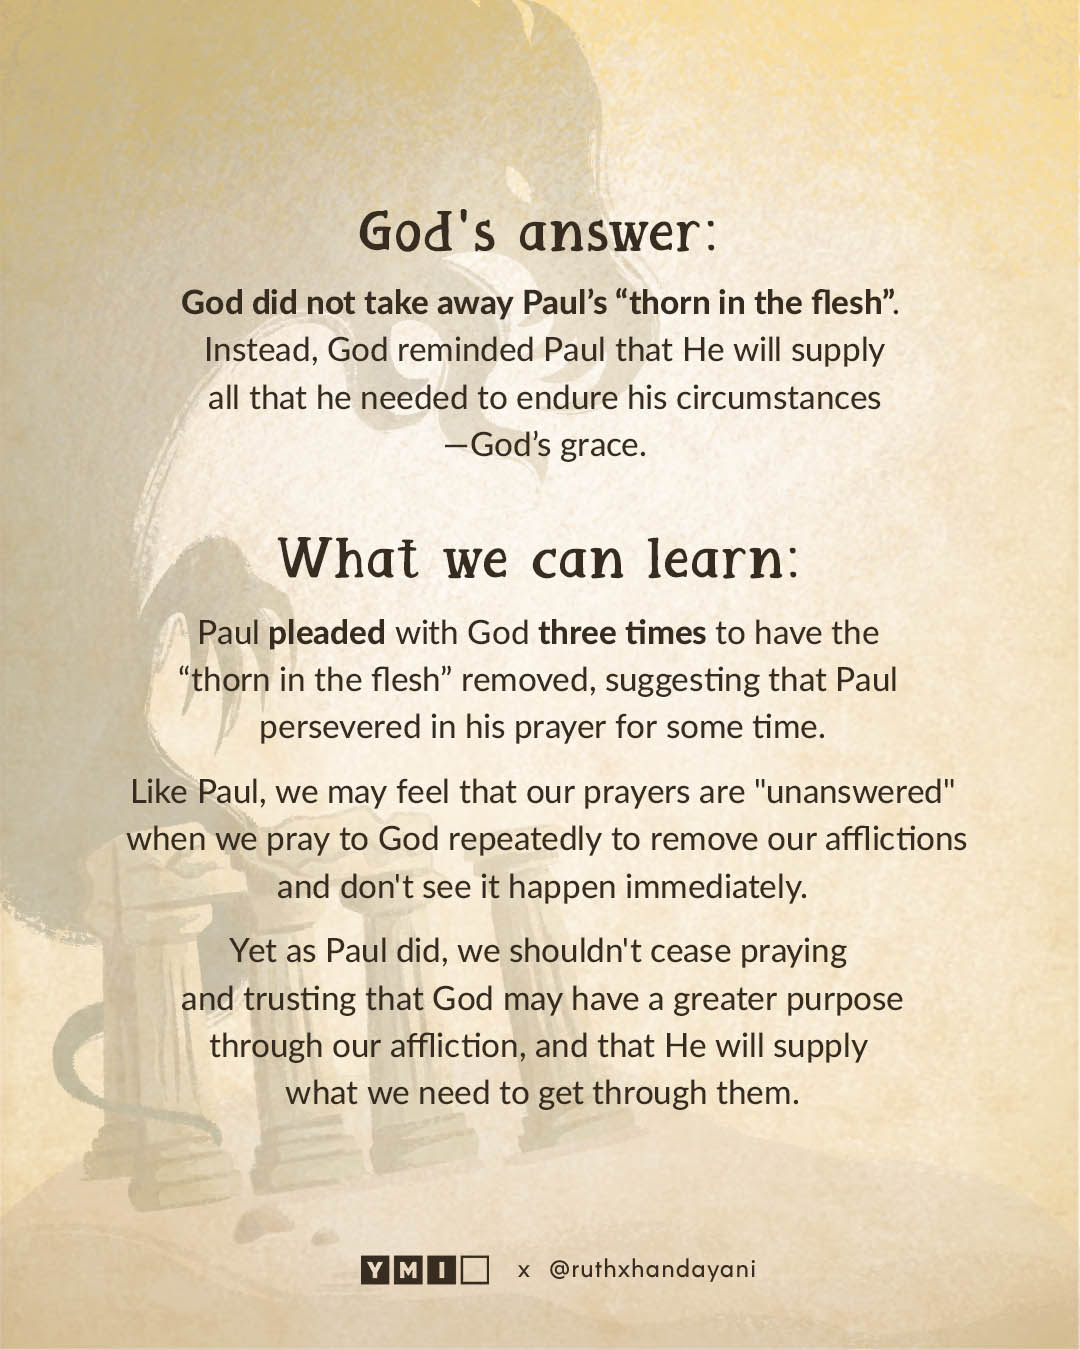 What we can learn from Paul's prayer